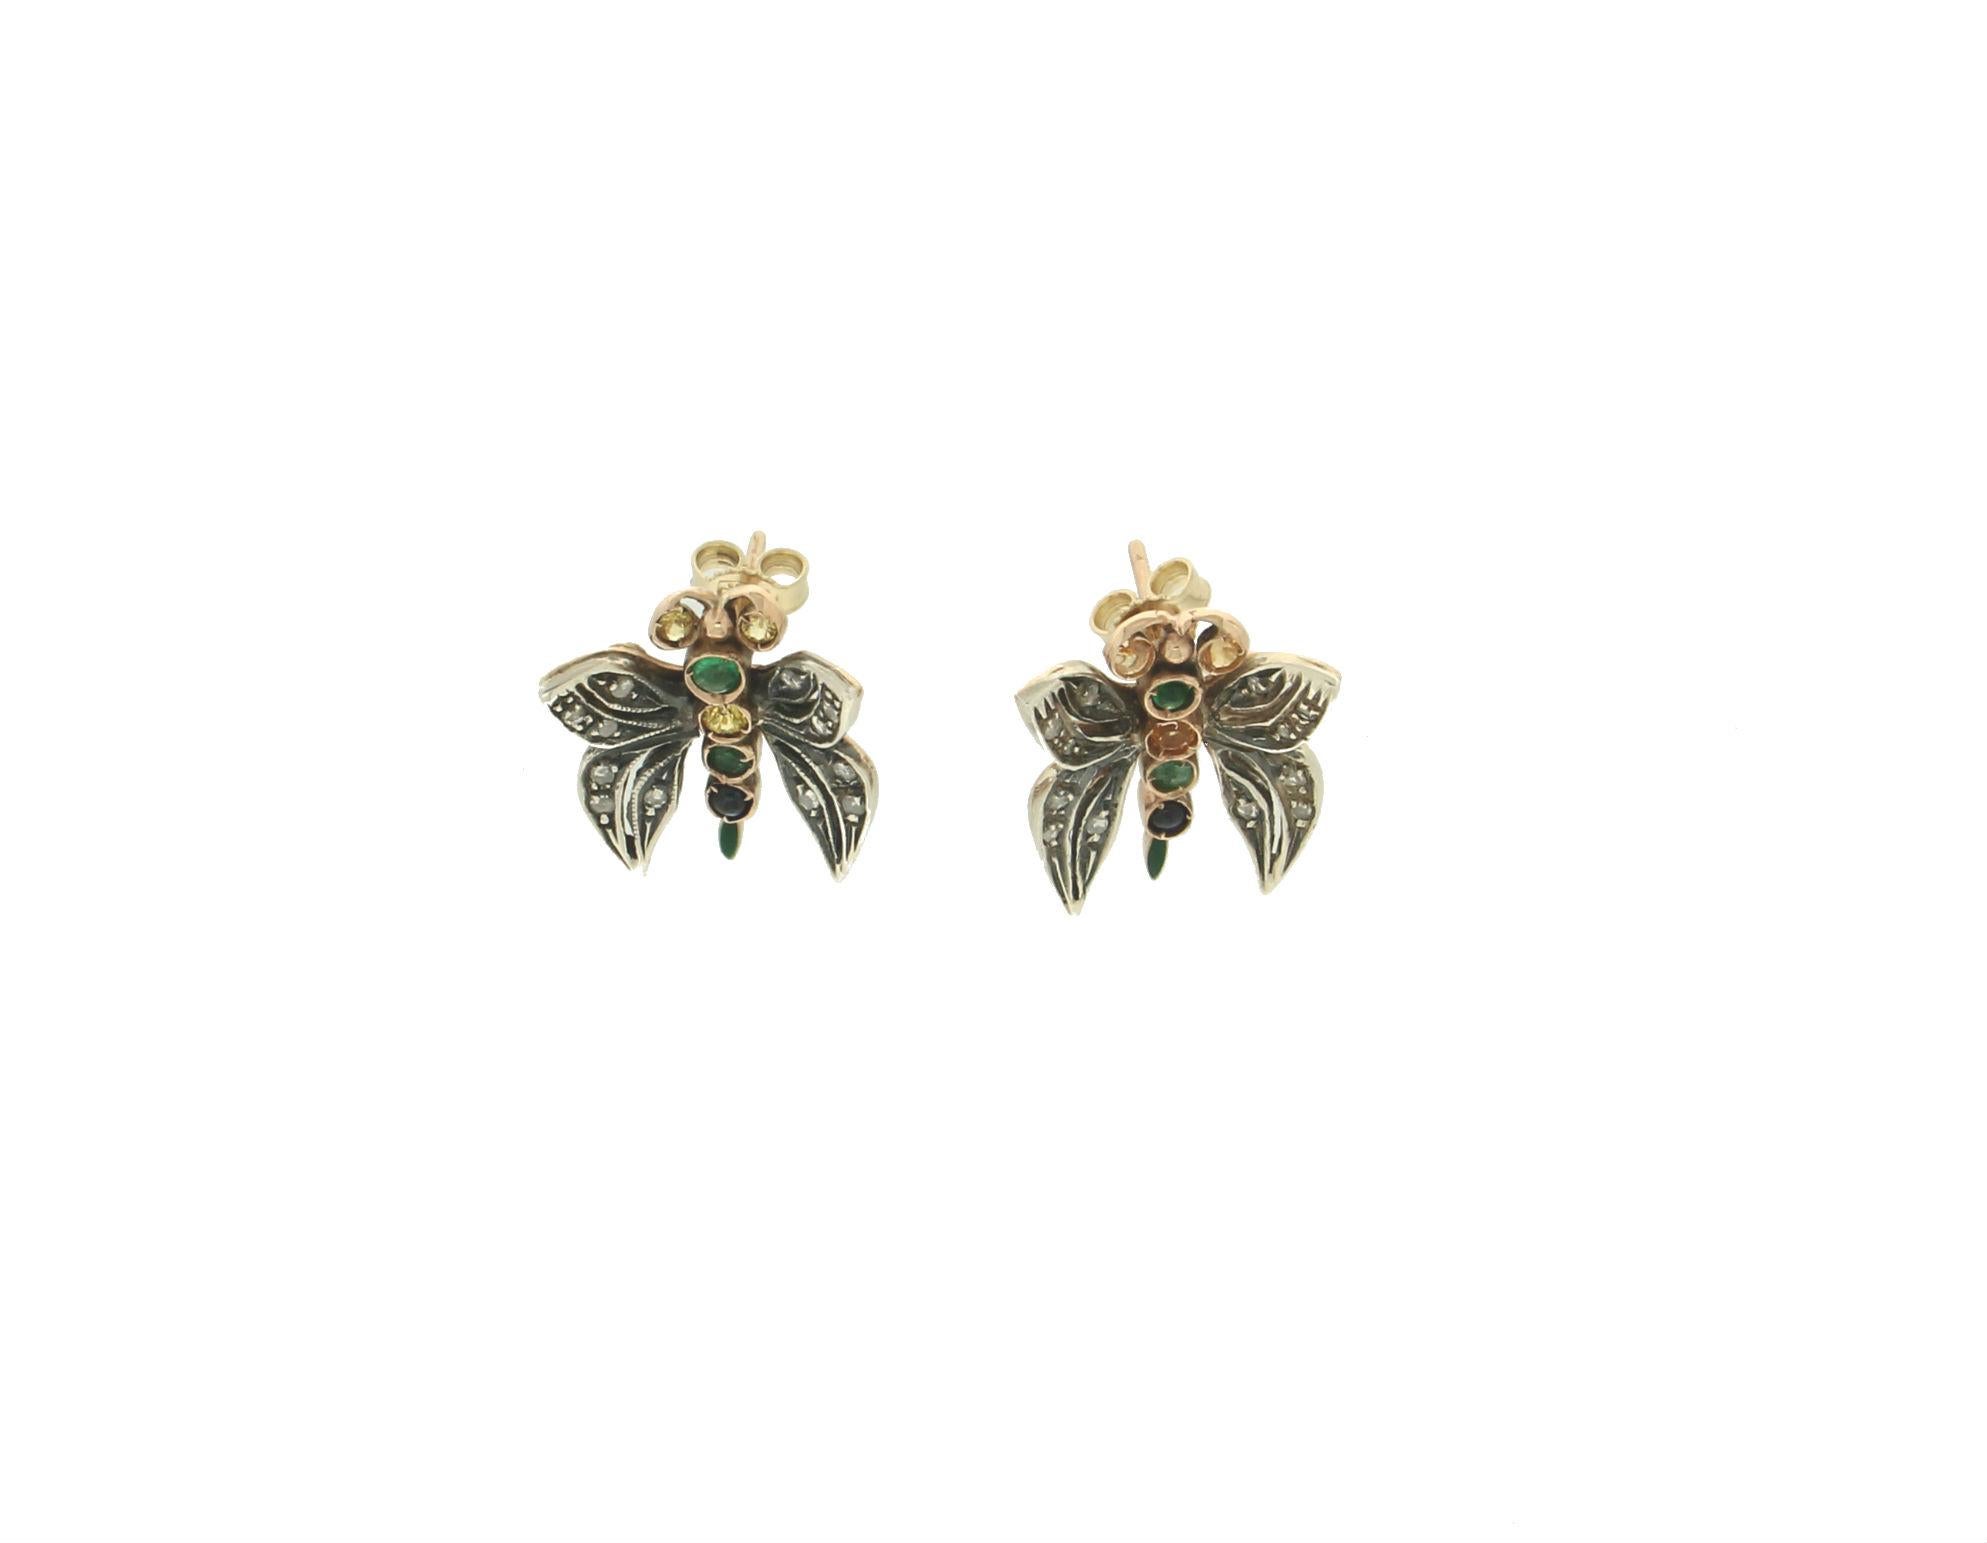 Precious butterfly-shaped earrings in 14 karat yellow gold and 800 thousandths silver made entirely by hand by our skilled artisans.
The earrings are adorned with old rose-cut diamonds on the wings and natural sapphires and emeralds along the